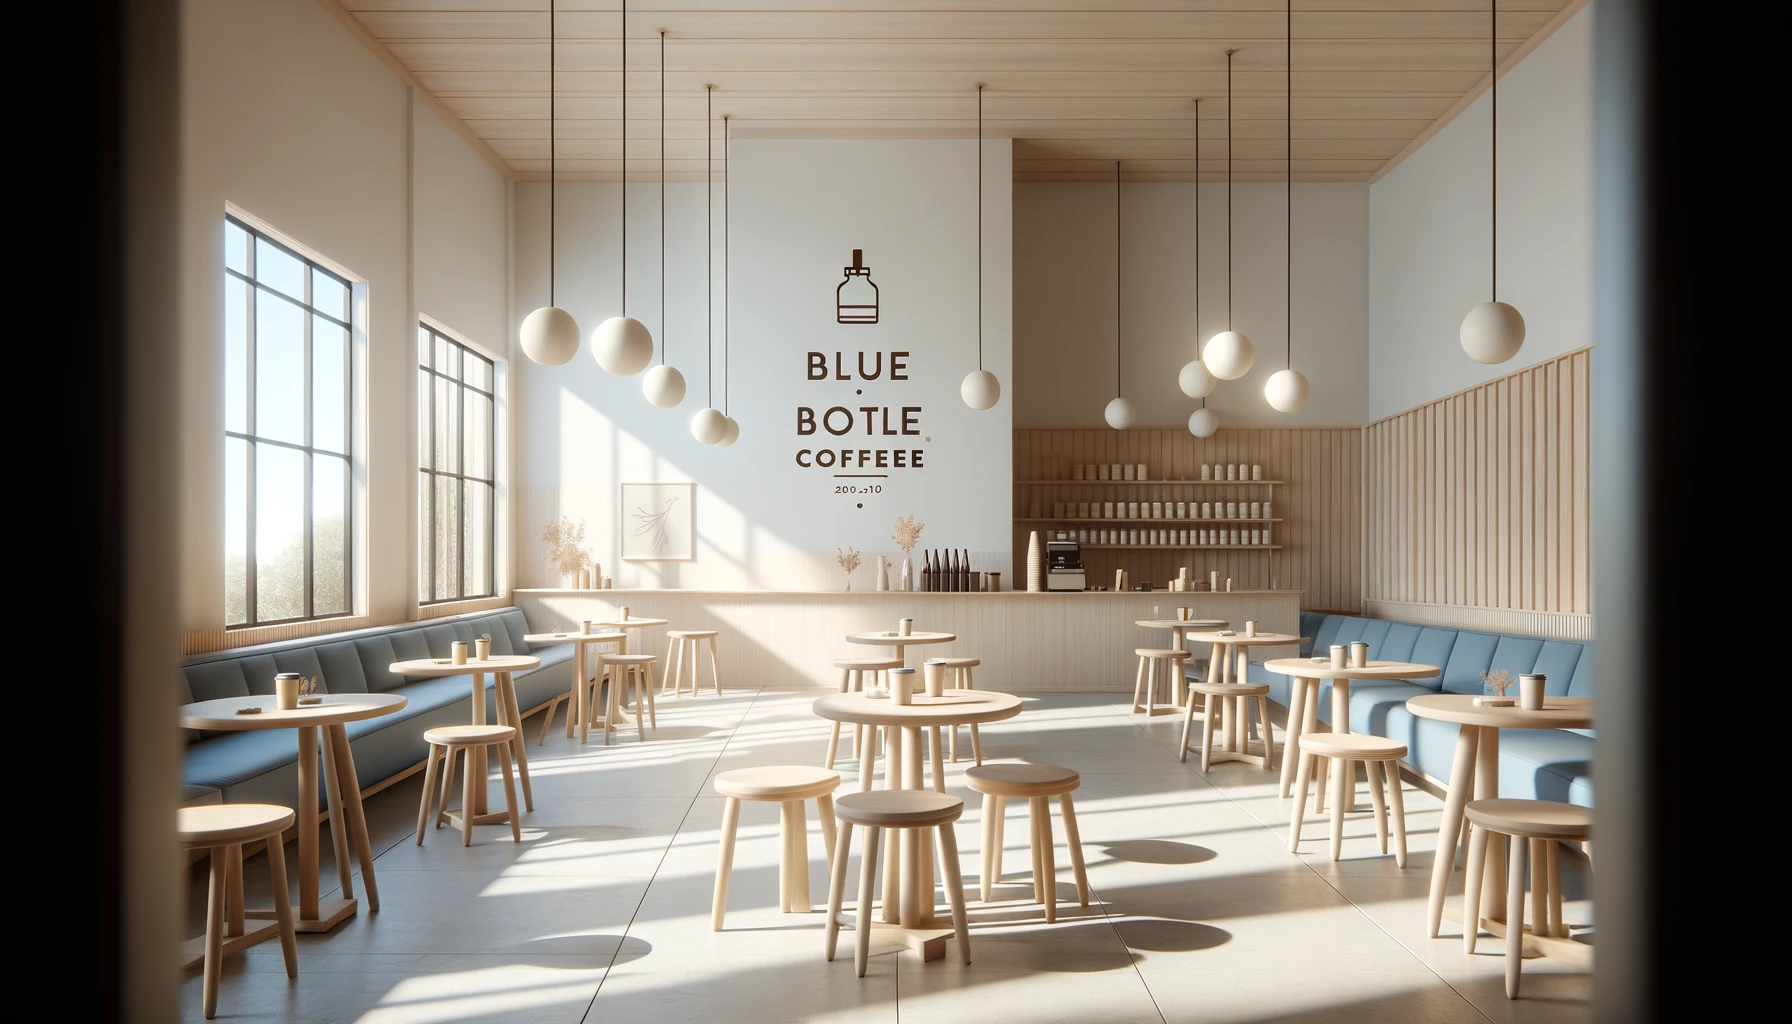 Minimalist interior of a Blue Bottle Coffee shop with natural lighting, simple wooden furniture, and uncluttered design, emphasizing open space and a neutral color palette.